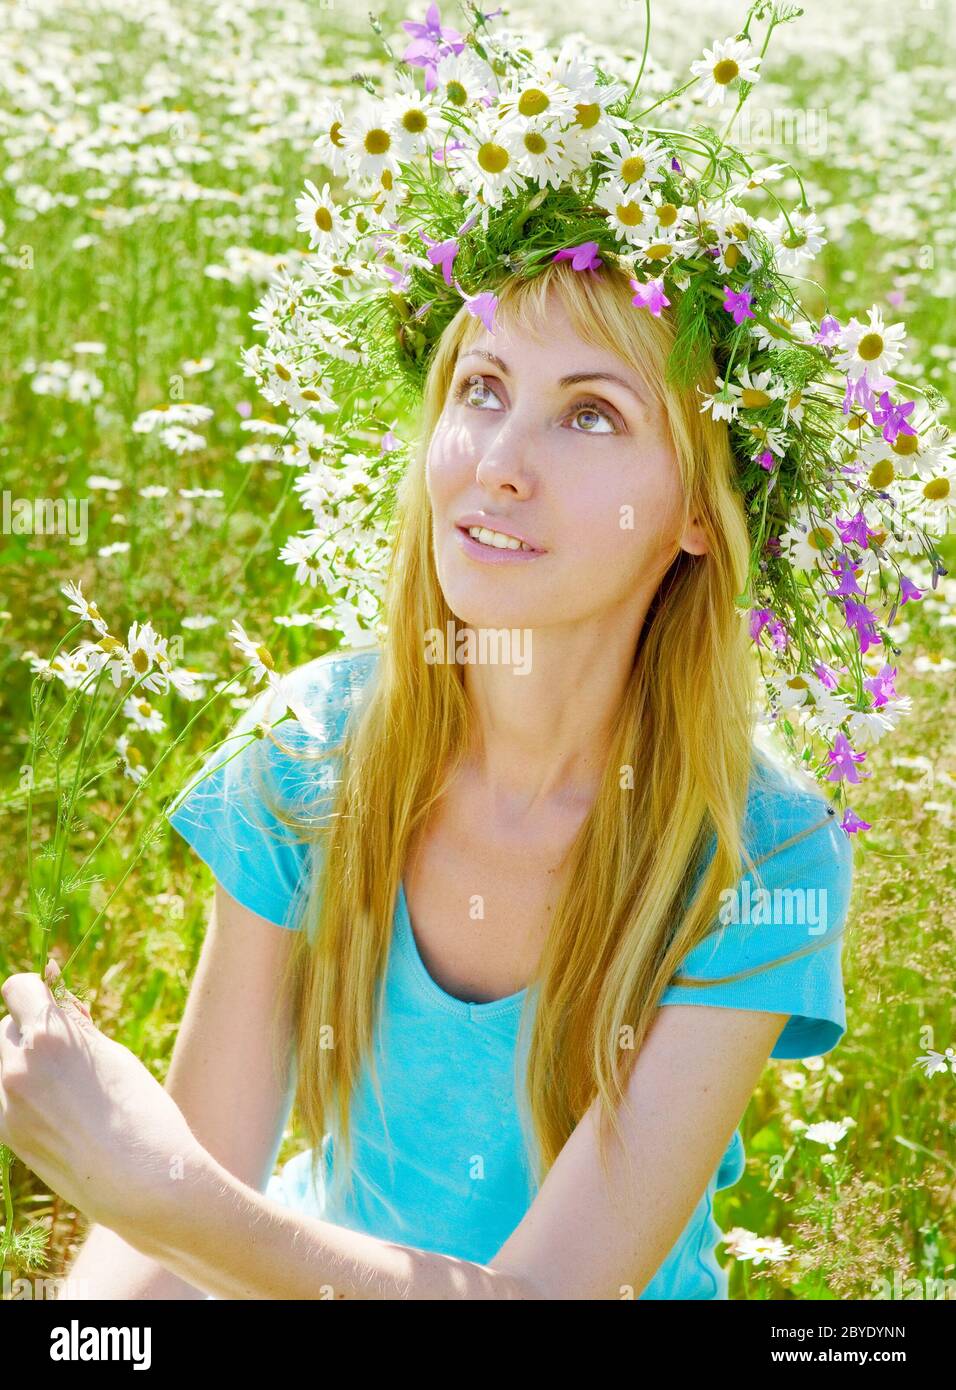 The happy young woman in a wreath Stock Photo